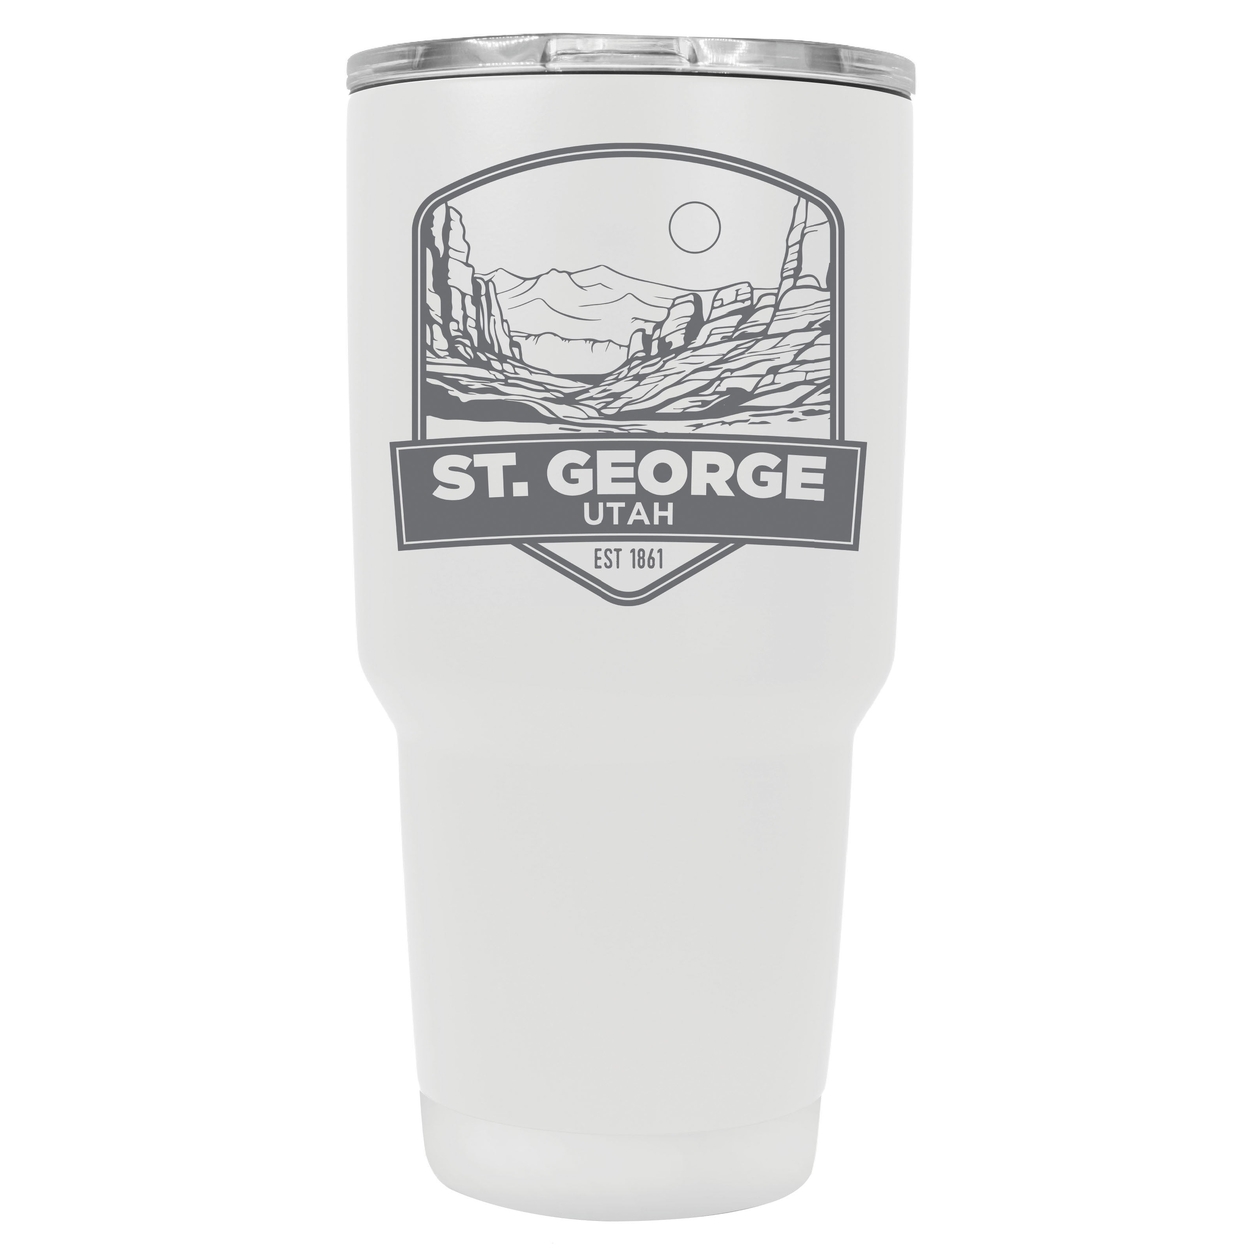 St. George Utah Souvenir 24 Oz Engraved Insulated Stainless Steel Tumbler - Red,,4-Pack